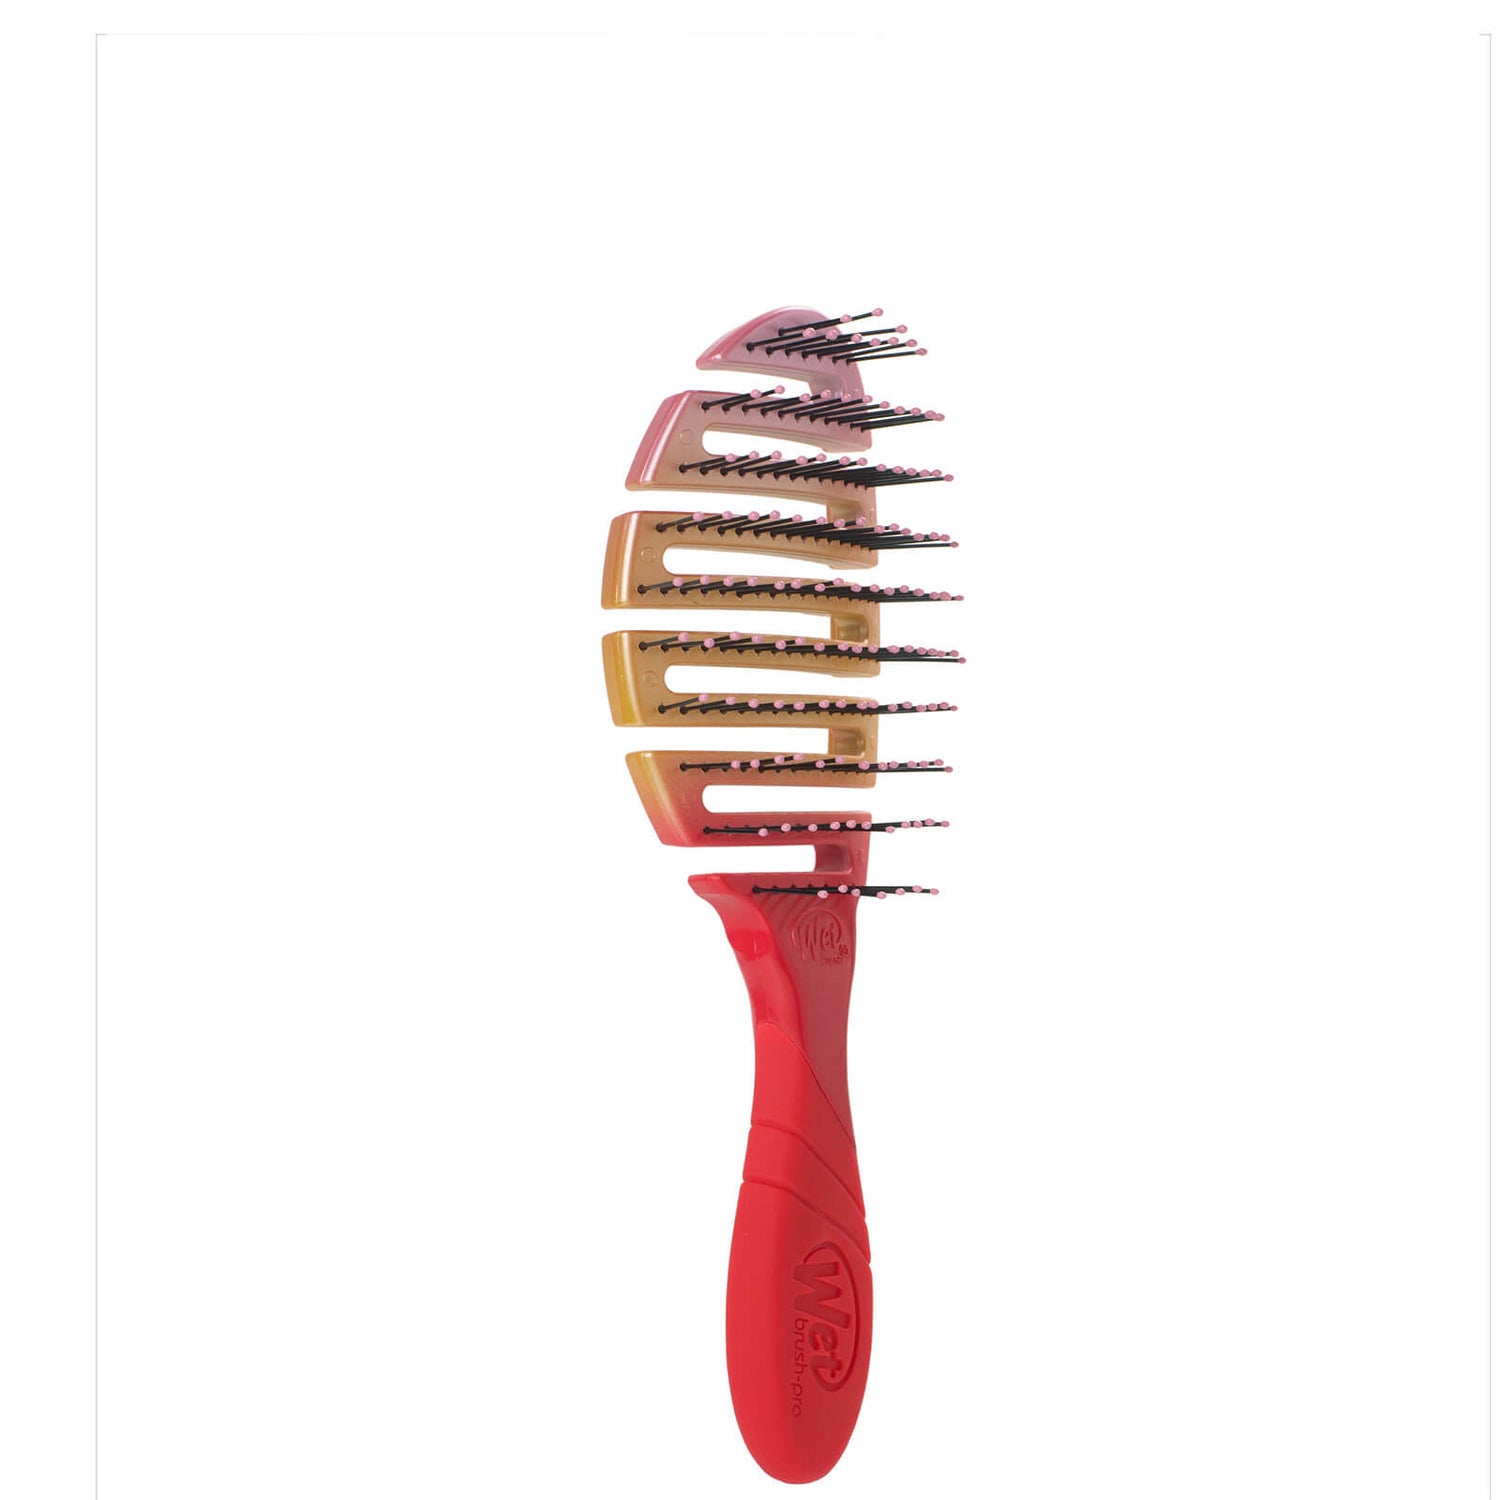 WetBrush Pro Flex Dry Ombre - Coral